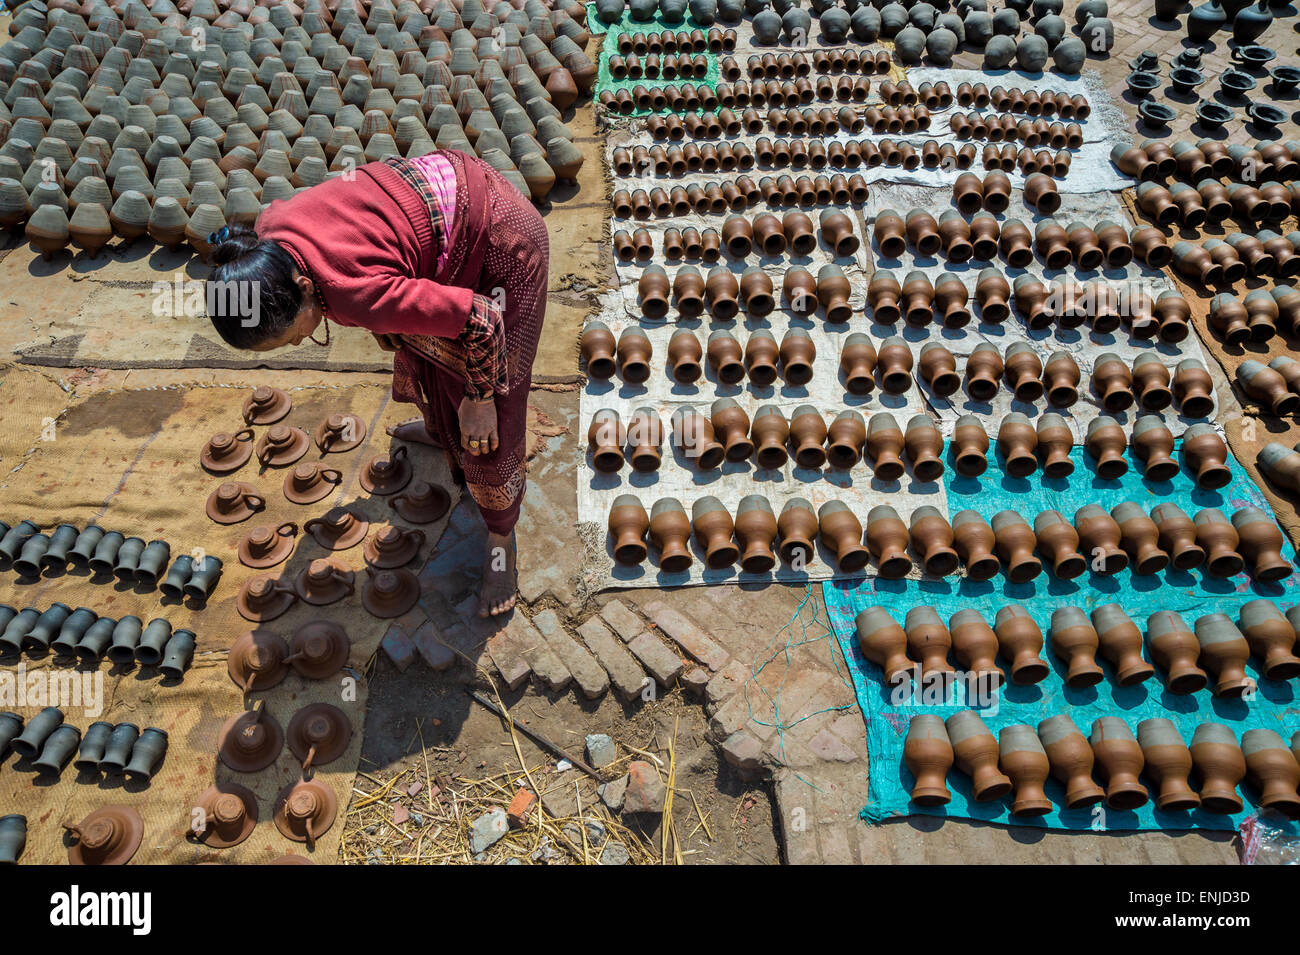 Bhaktapur, Nepal - 20 march 2015: Elderly woman placing potteries to dry on Pottery Square. Stock Photo